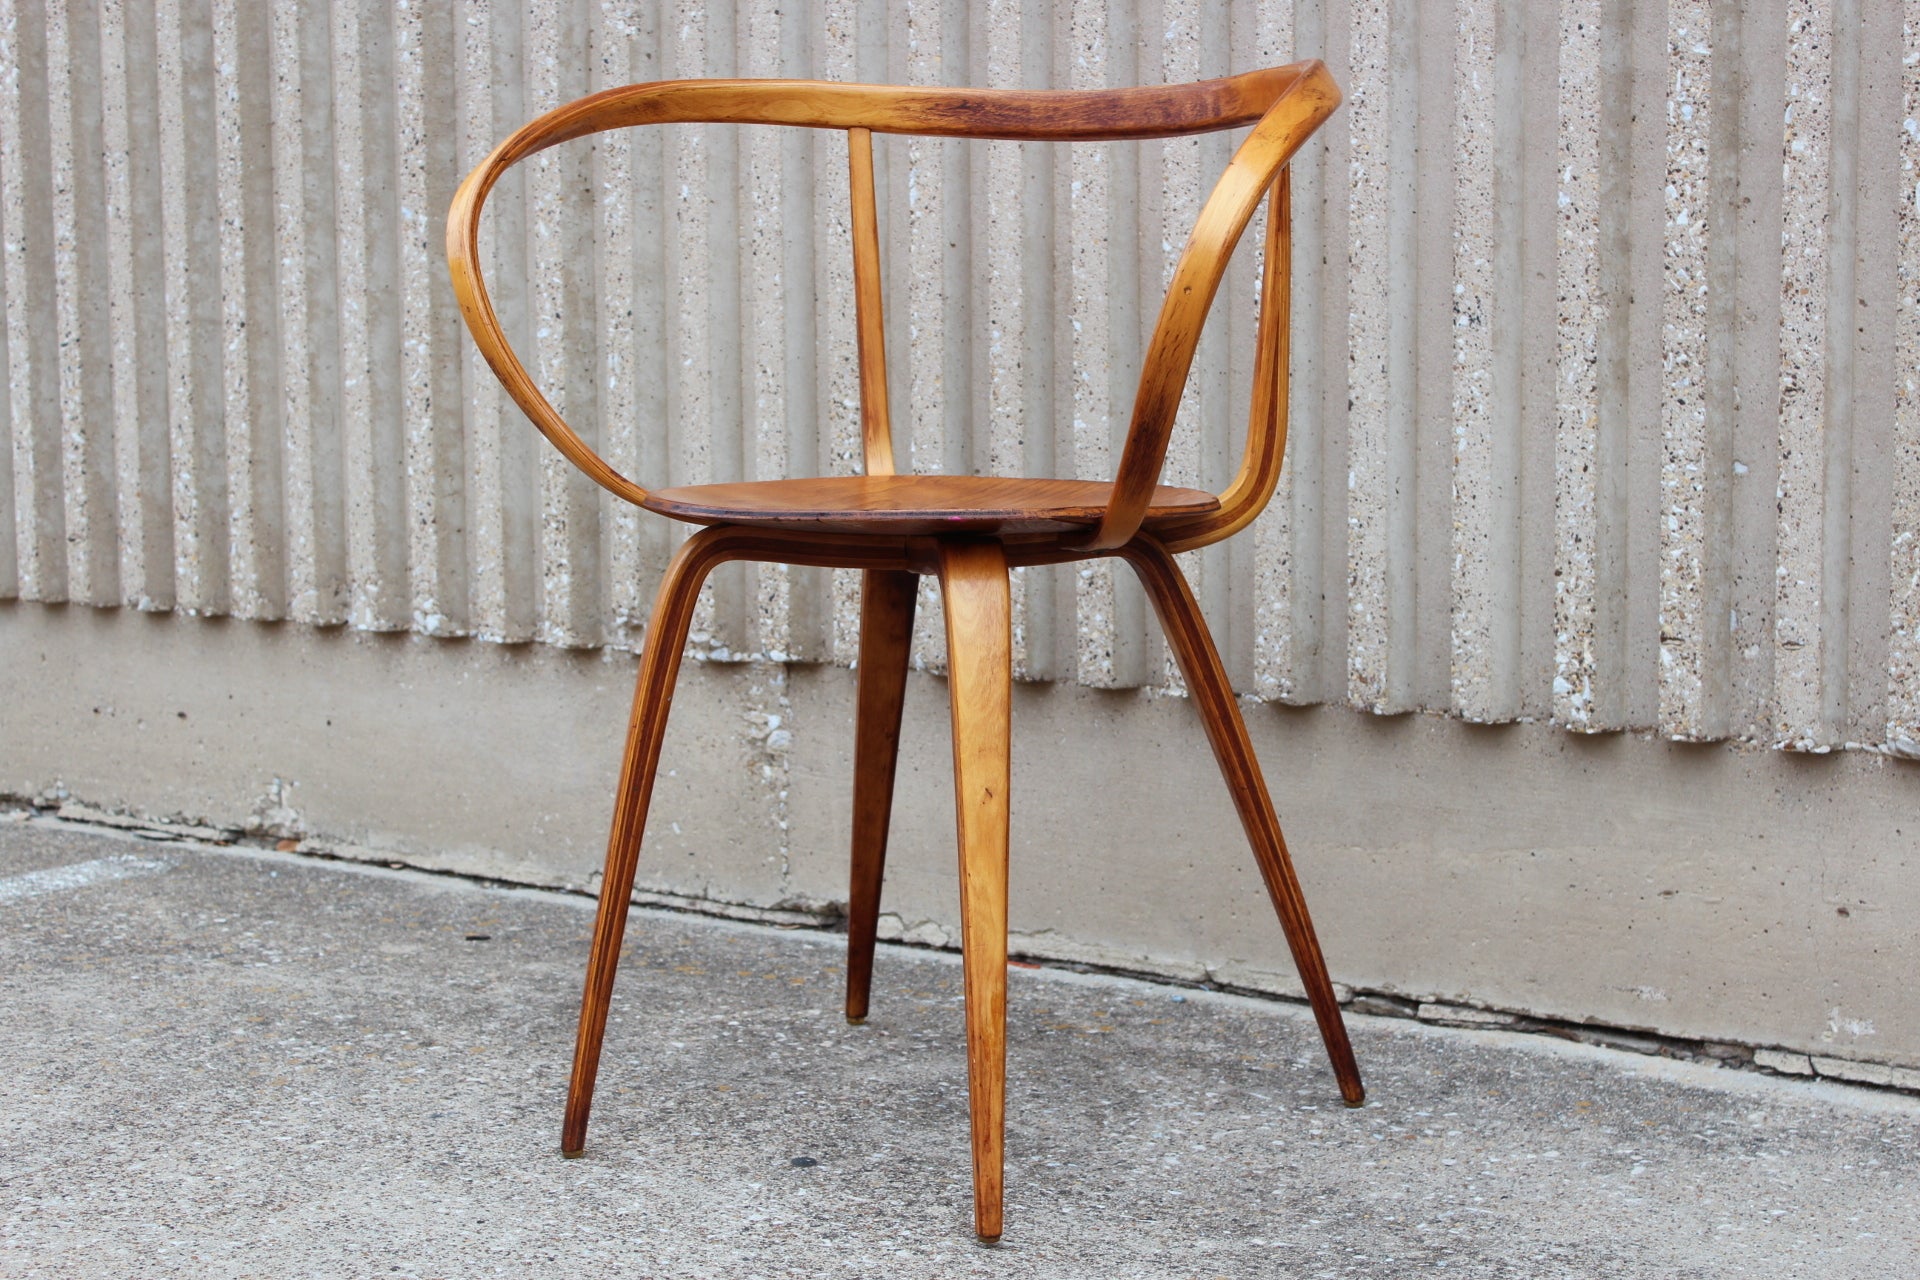 The Pretzel Chair by George Nelson